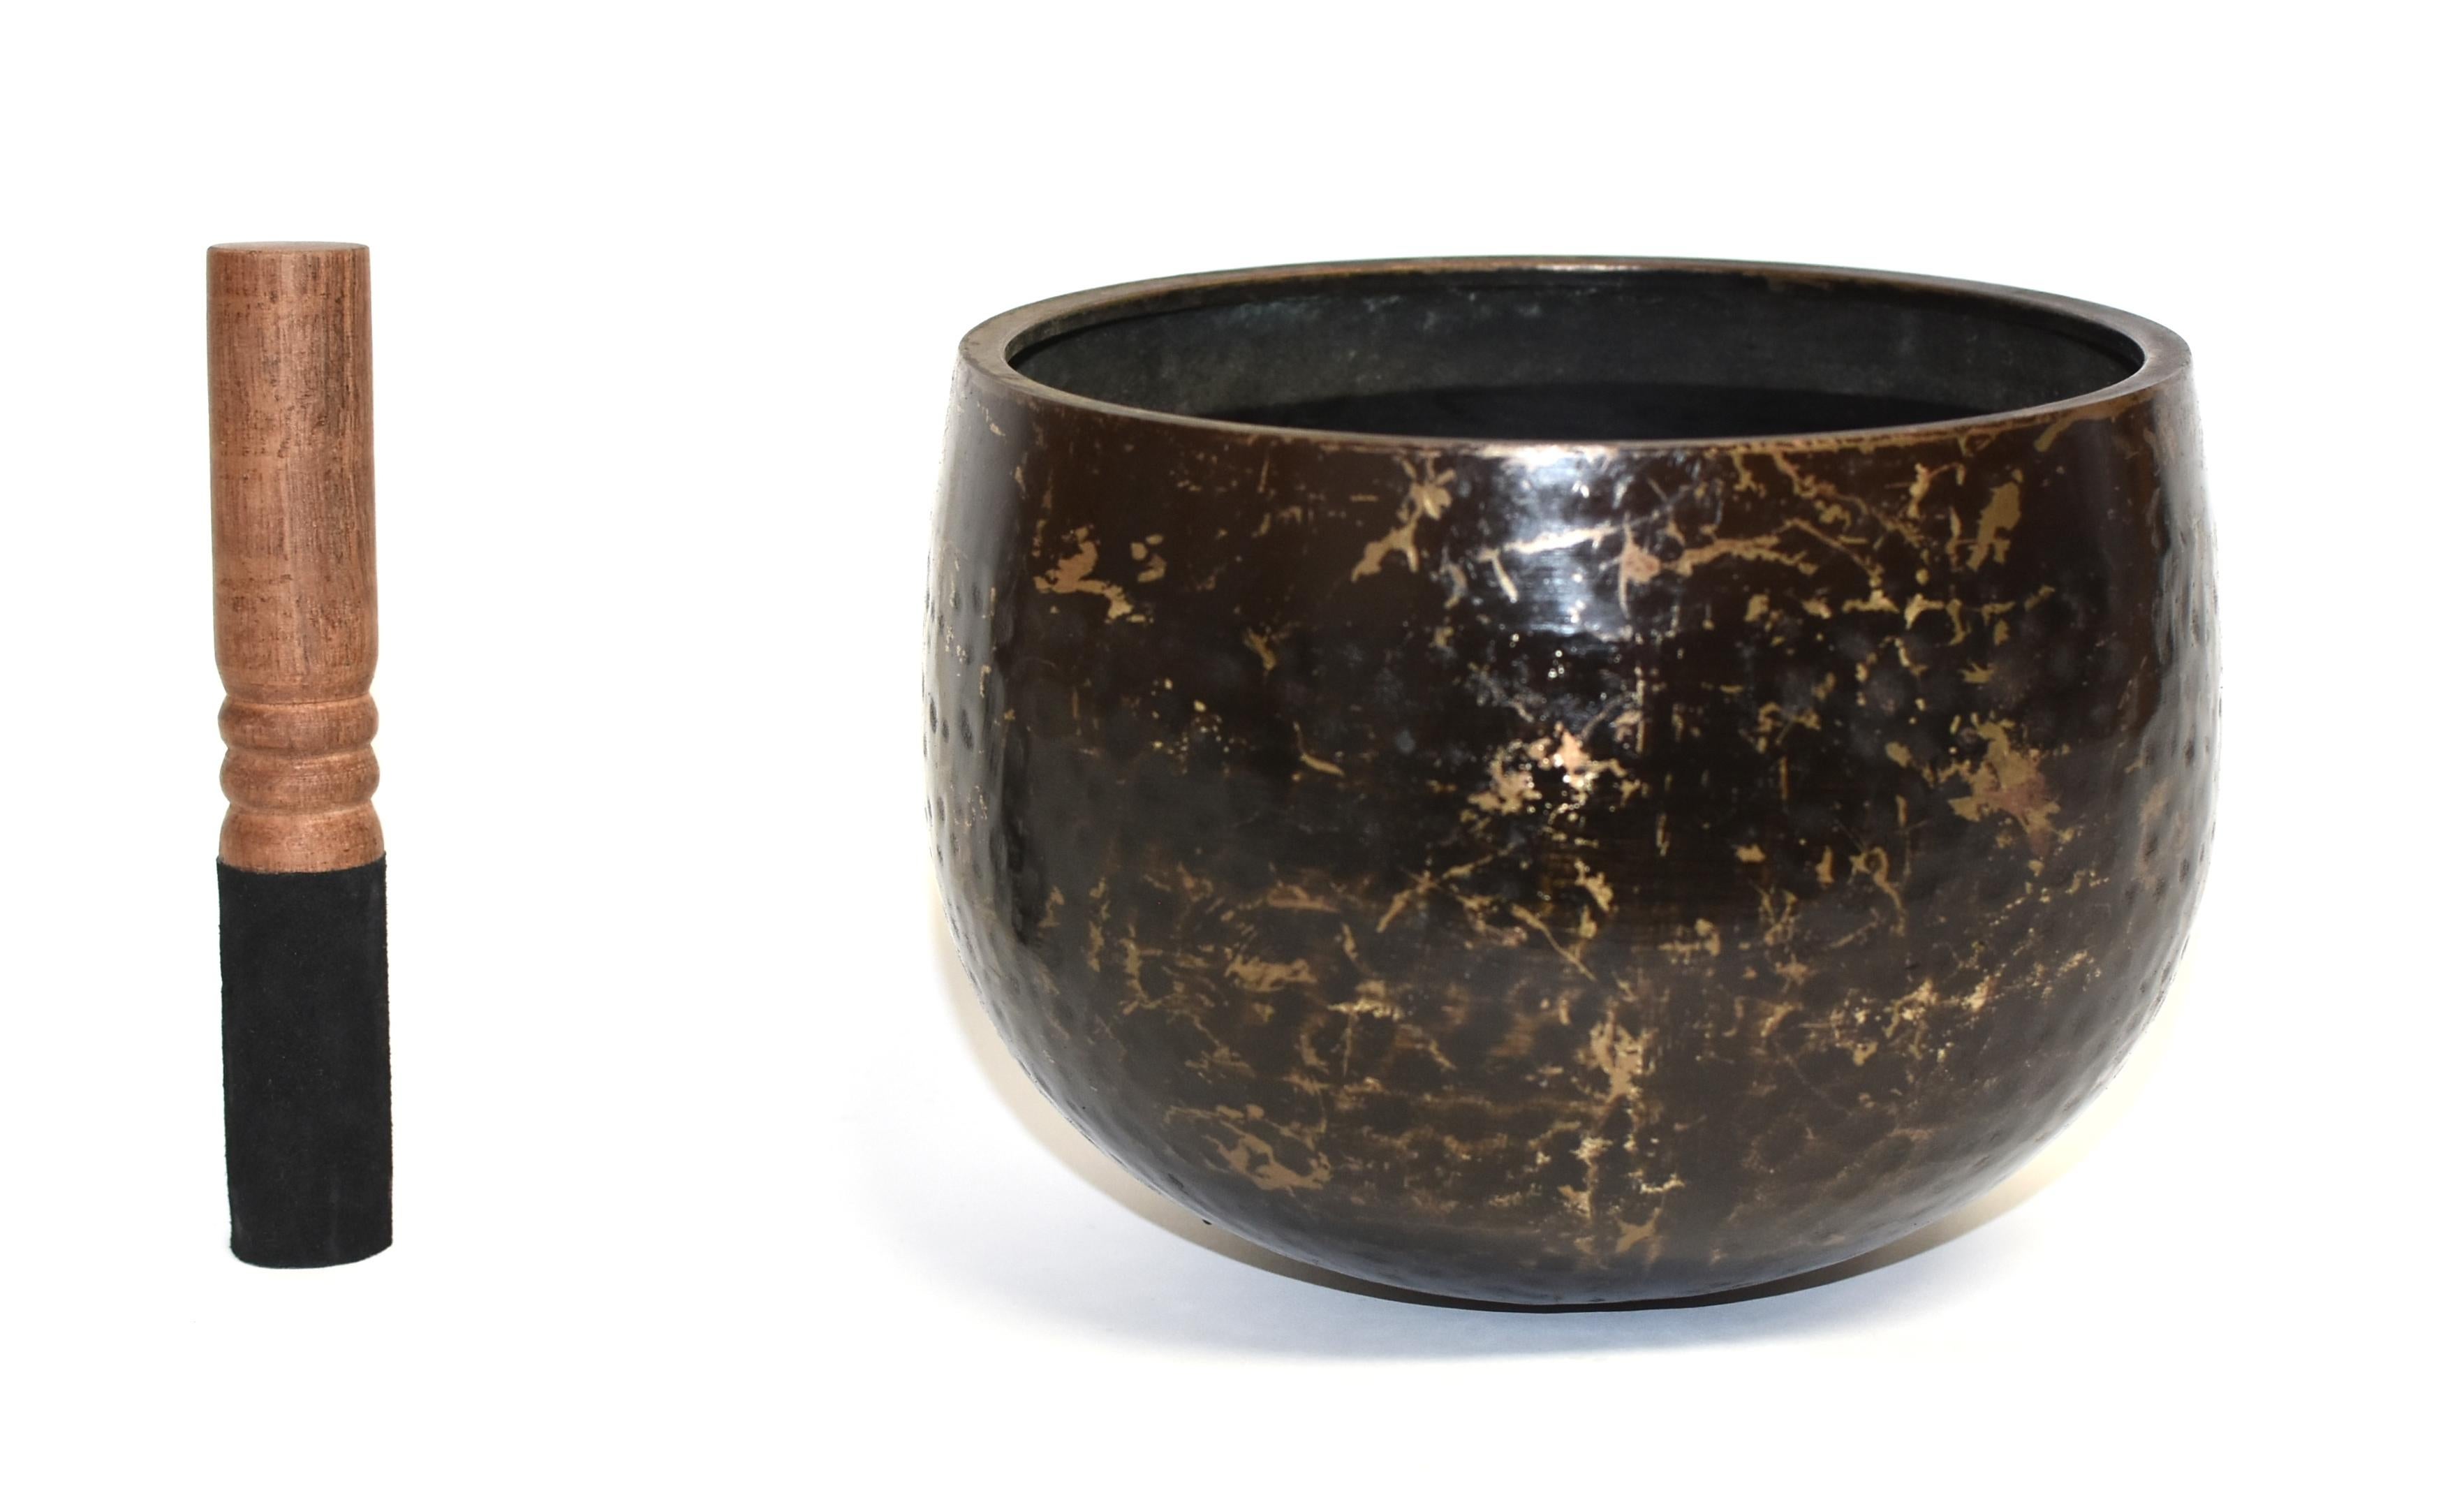 A large, substantial, handcrafted singing bowl made of solid bronze with hand-hammered beehive pattern. This bowl makes a beautiful, enlightening sound that is at once soothing and thought provoking. Such a bowl was used in the Japanese temple to